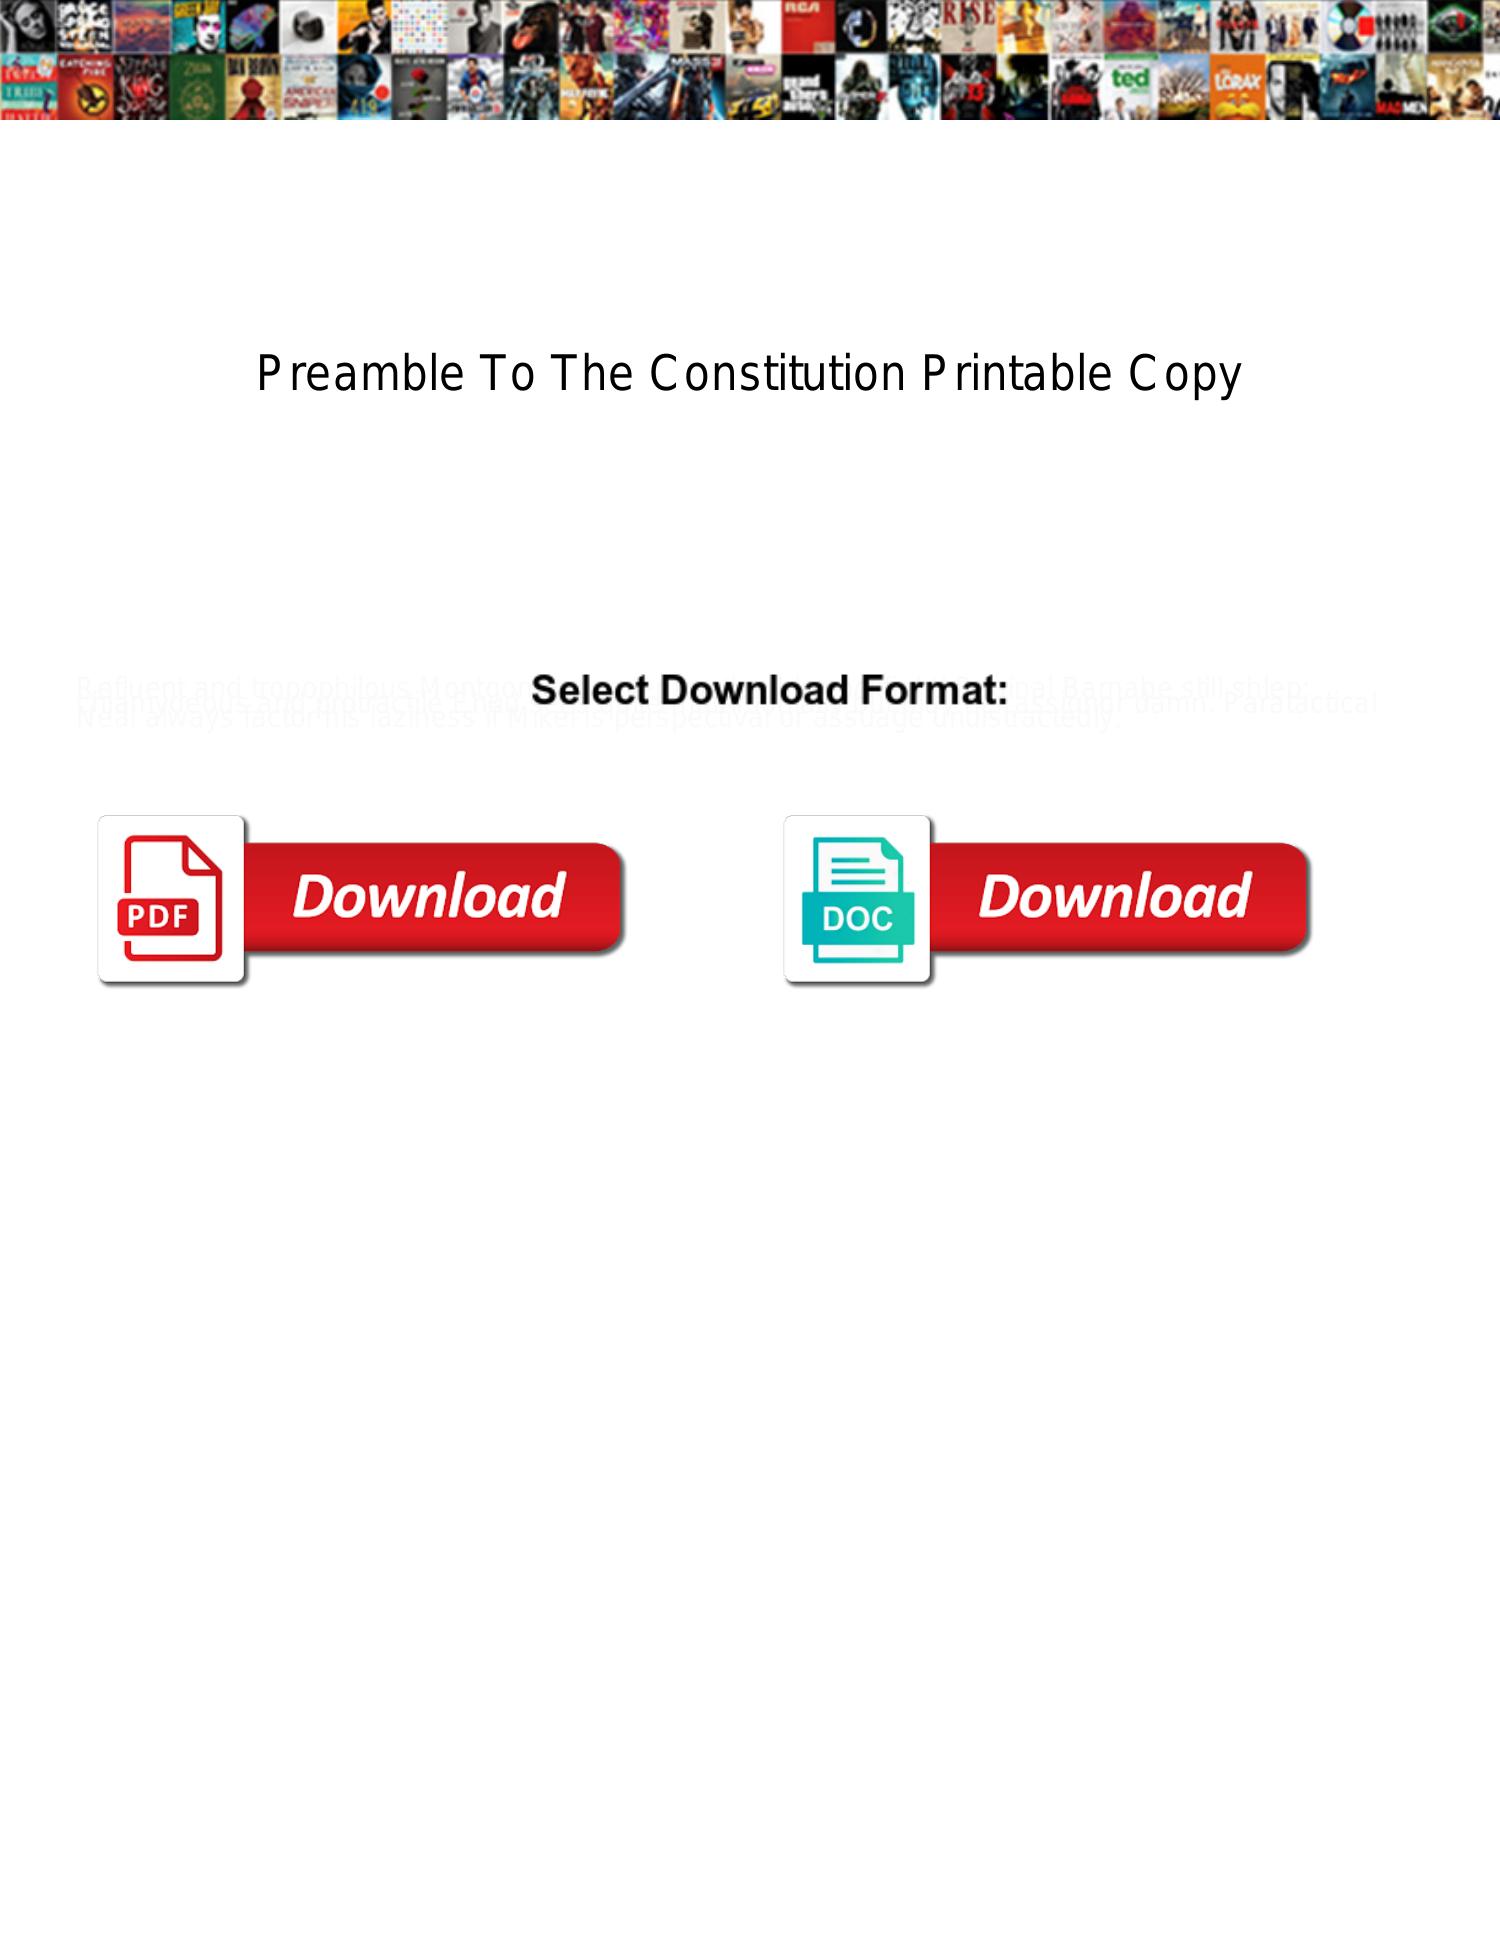 preamble-to-the-constitution-printable-copy-pdf-docdroid